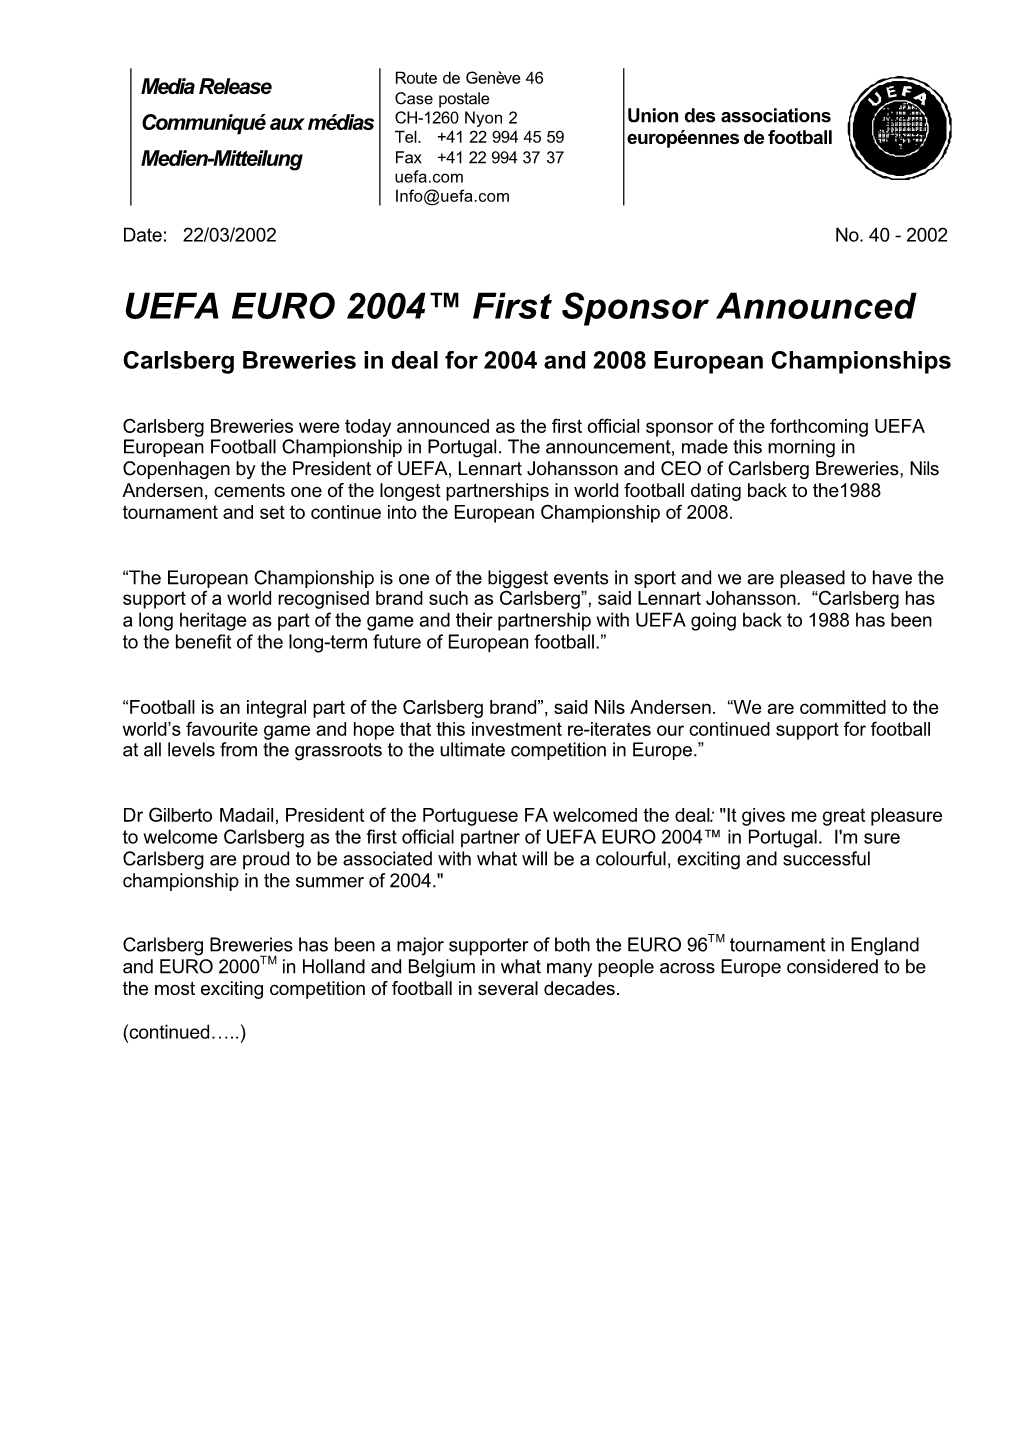 UEFA EURO 2004™ First Sponsor Announced Carlsberg Breweries in Deal for 2004 and 2008 European Championships